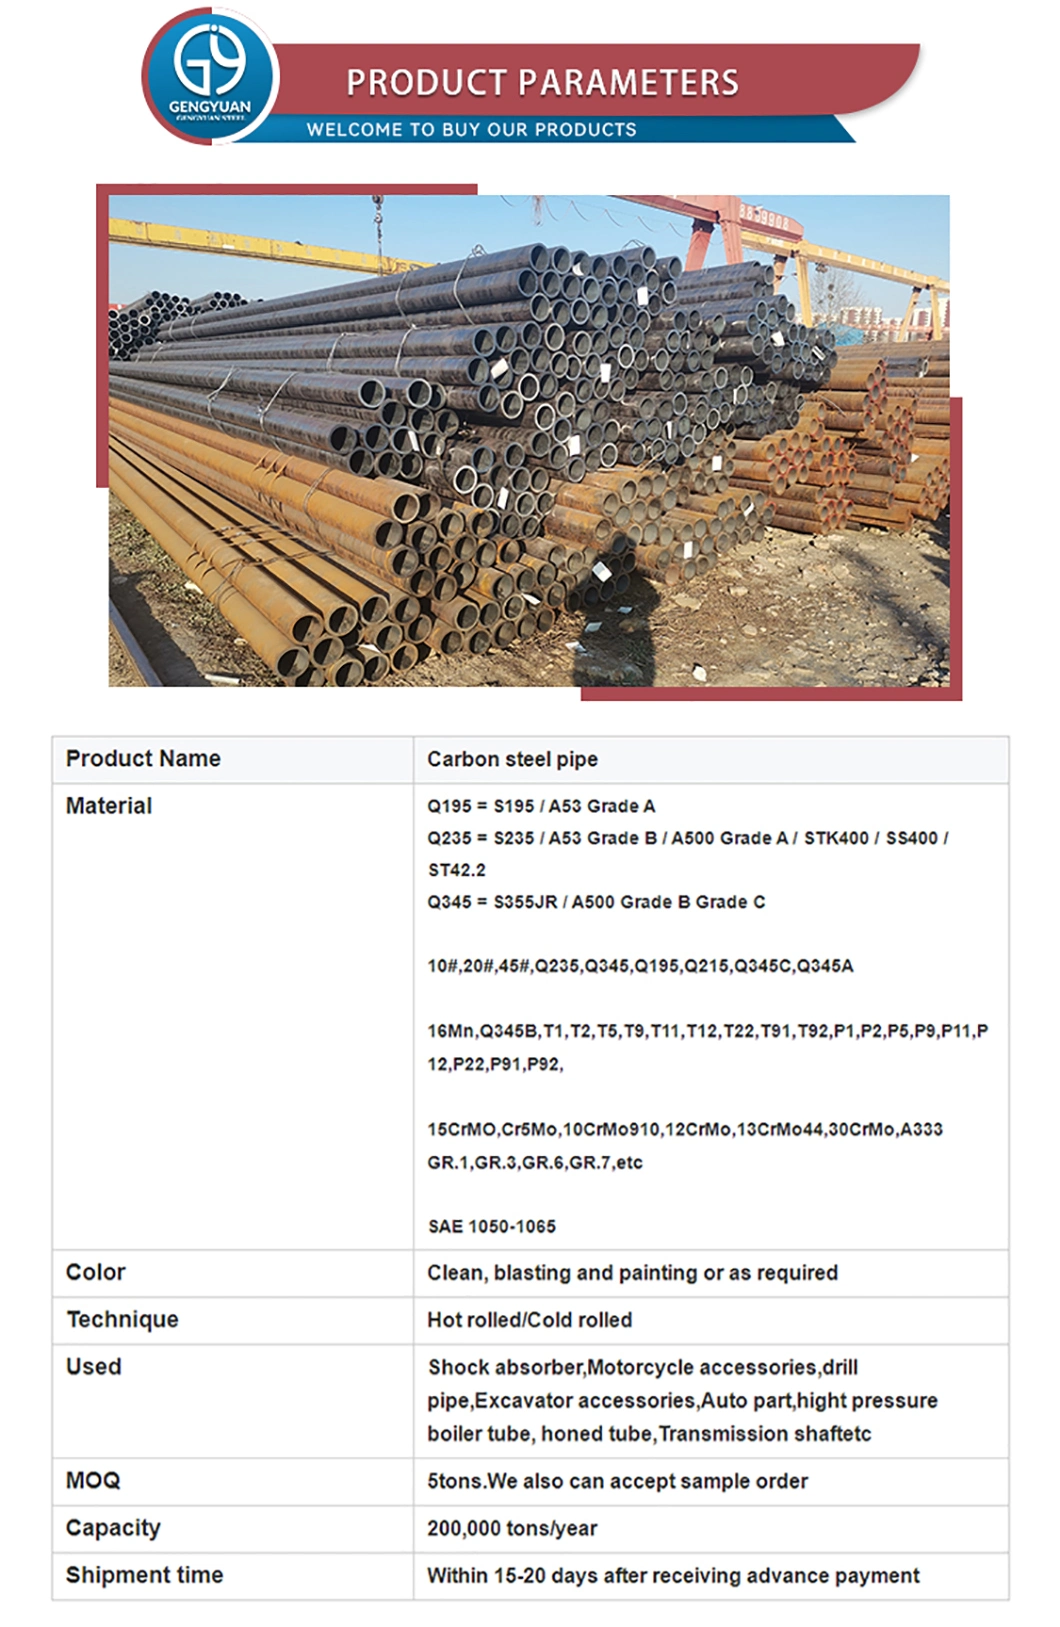 Sch 40 ASTM A53 A106 Low Temperature Cold Drawn Precision Carbon Ms Black Seamless Steel Tube Pipe